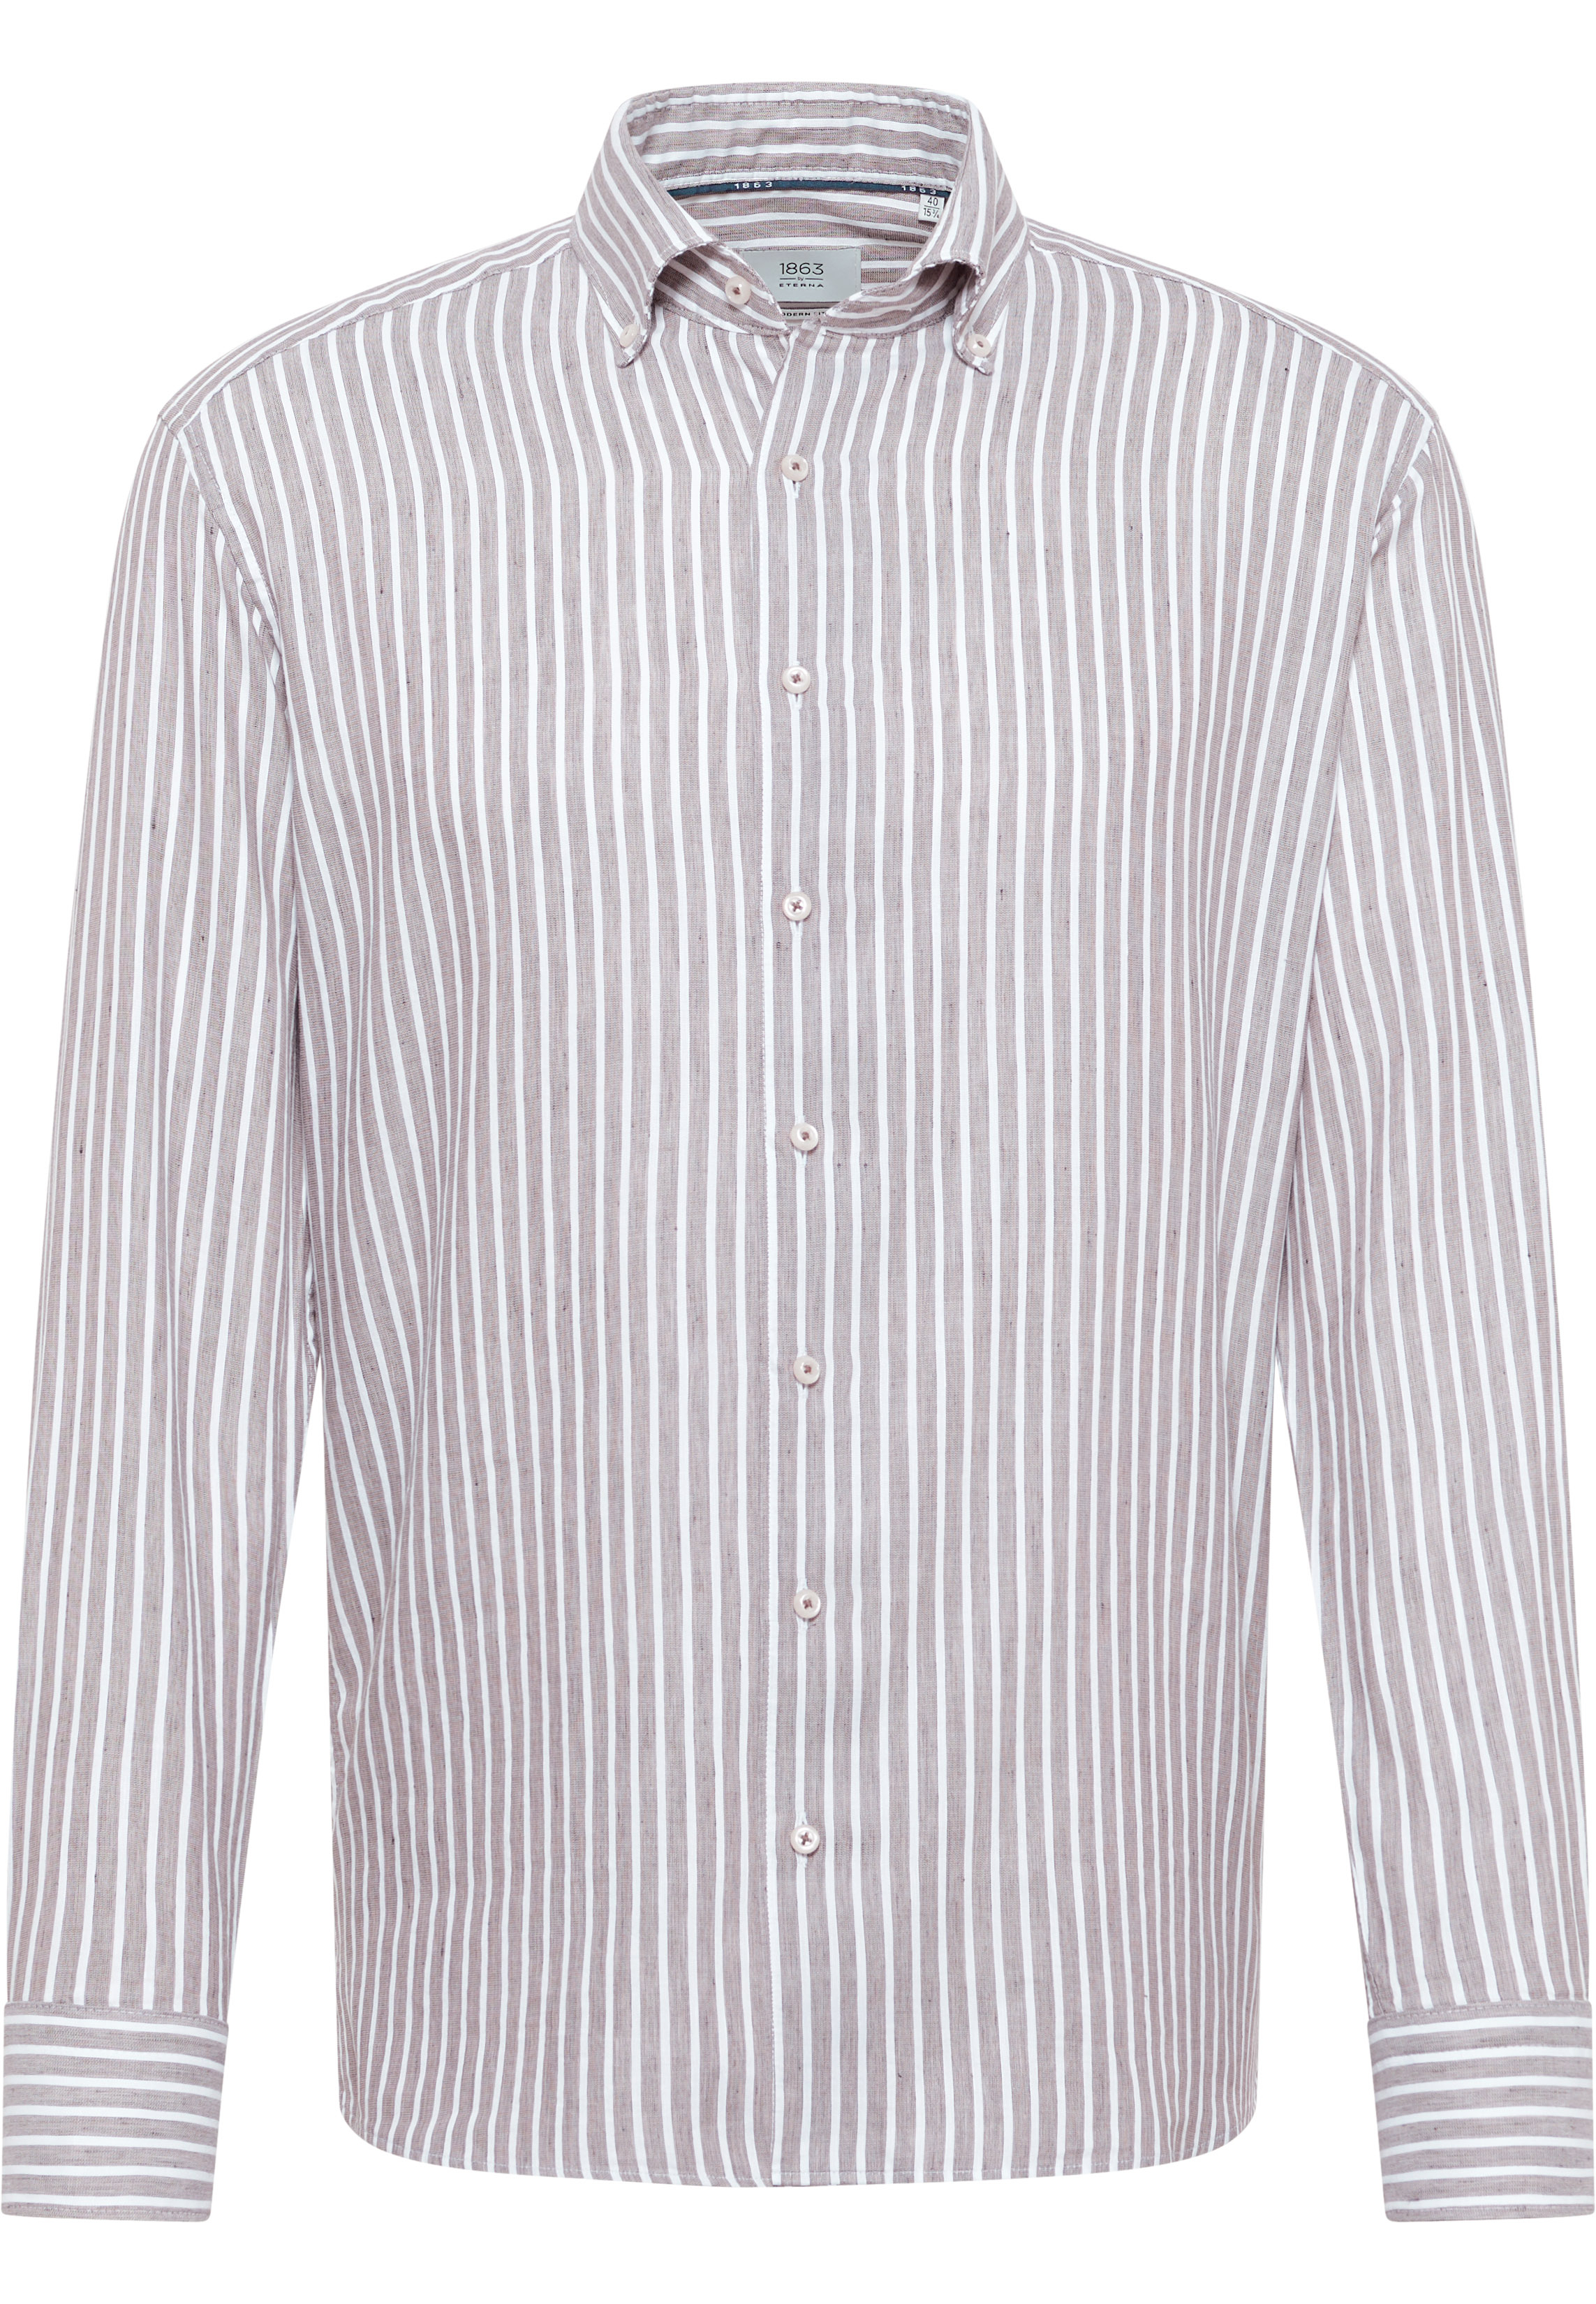 MODERN FIT Shirt in brown striped